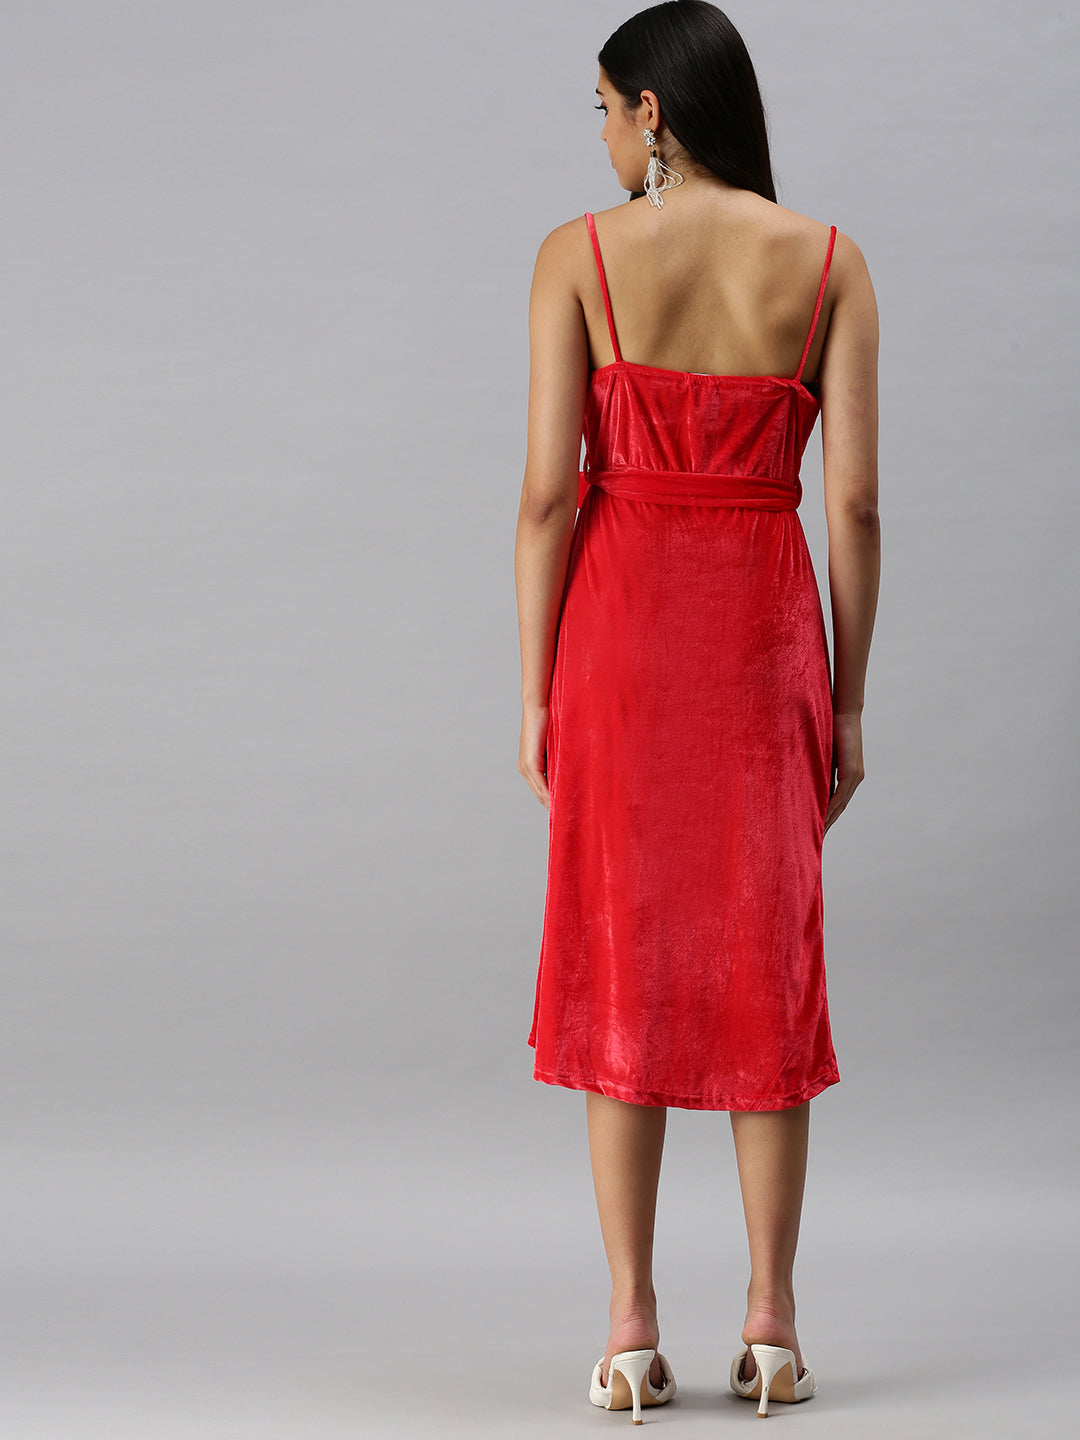 Women's A-Line Cowl Red Solid Dress